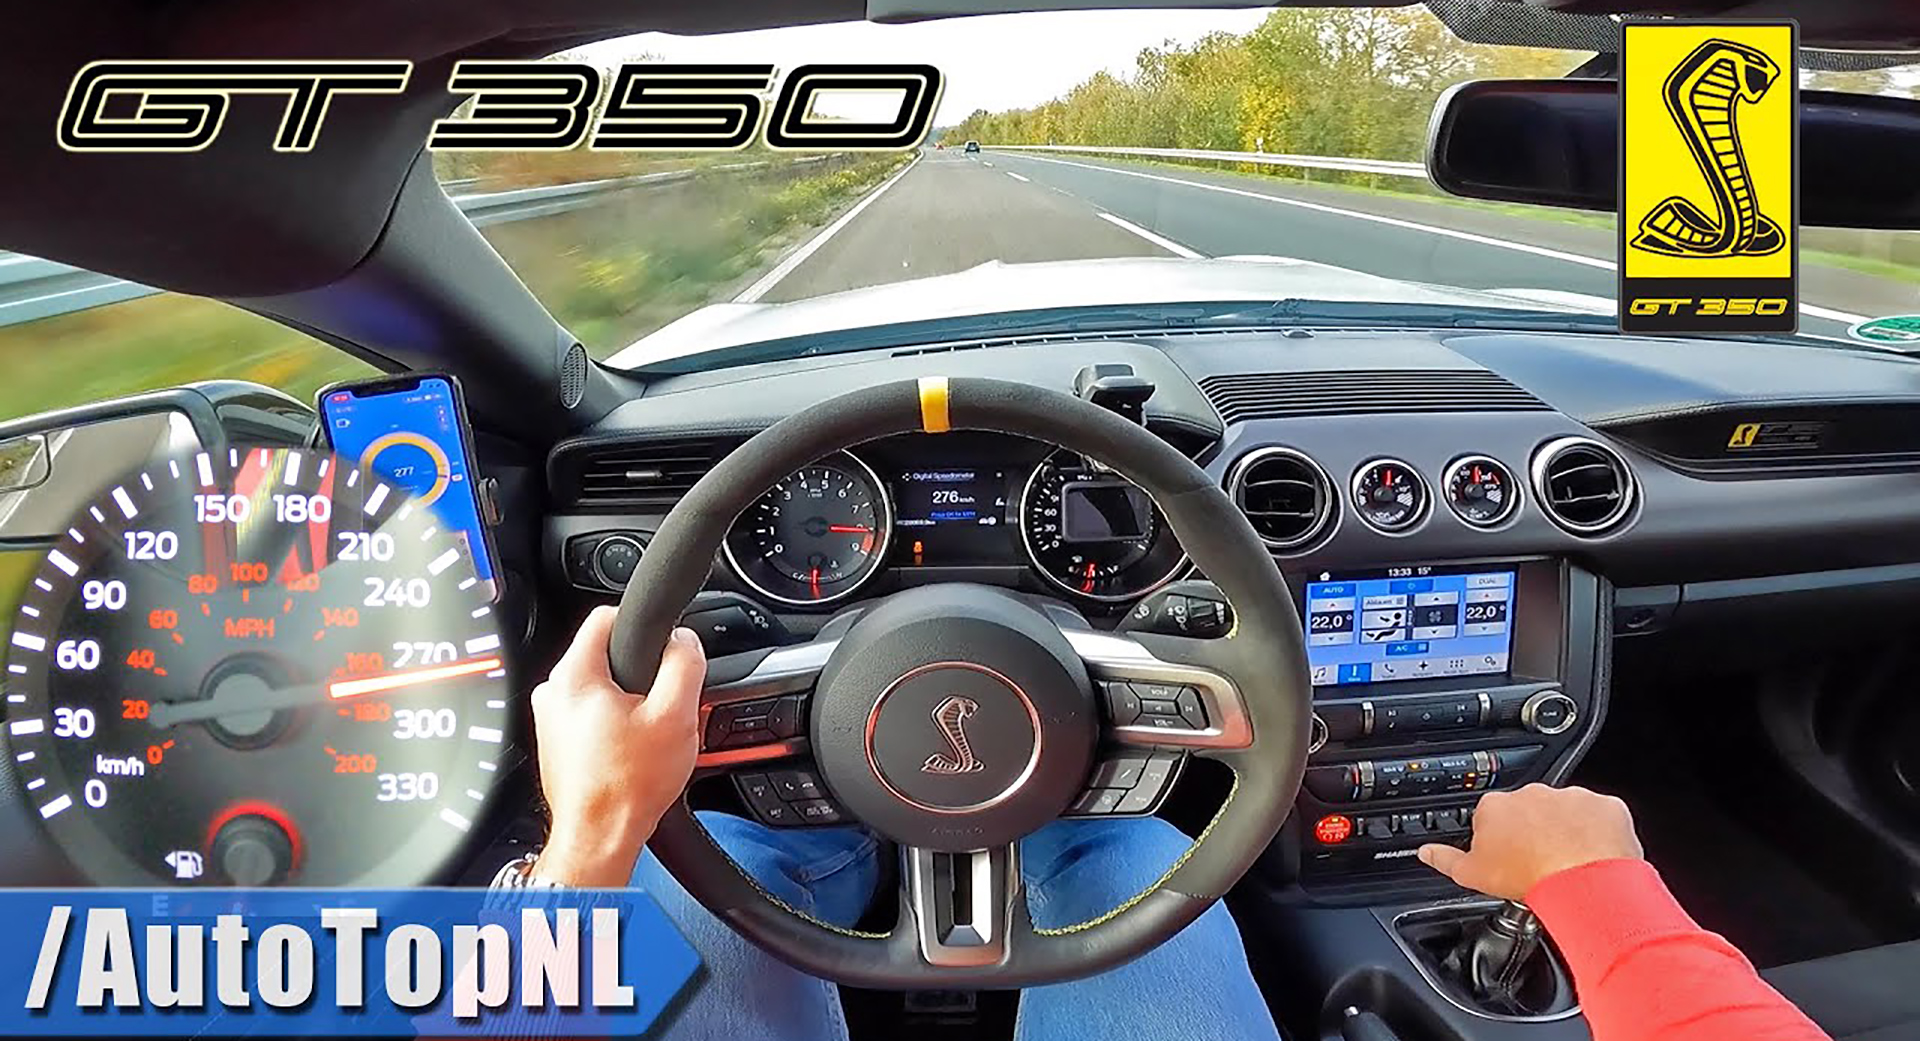 Ford Mustang GT350 Goes A Top Run On The Autobahn, Hits 172 MPH | Carscoops